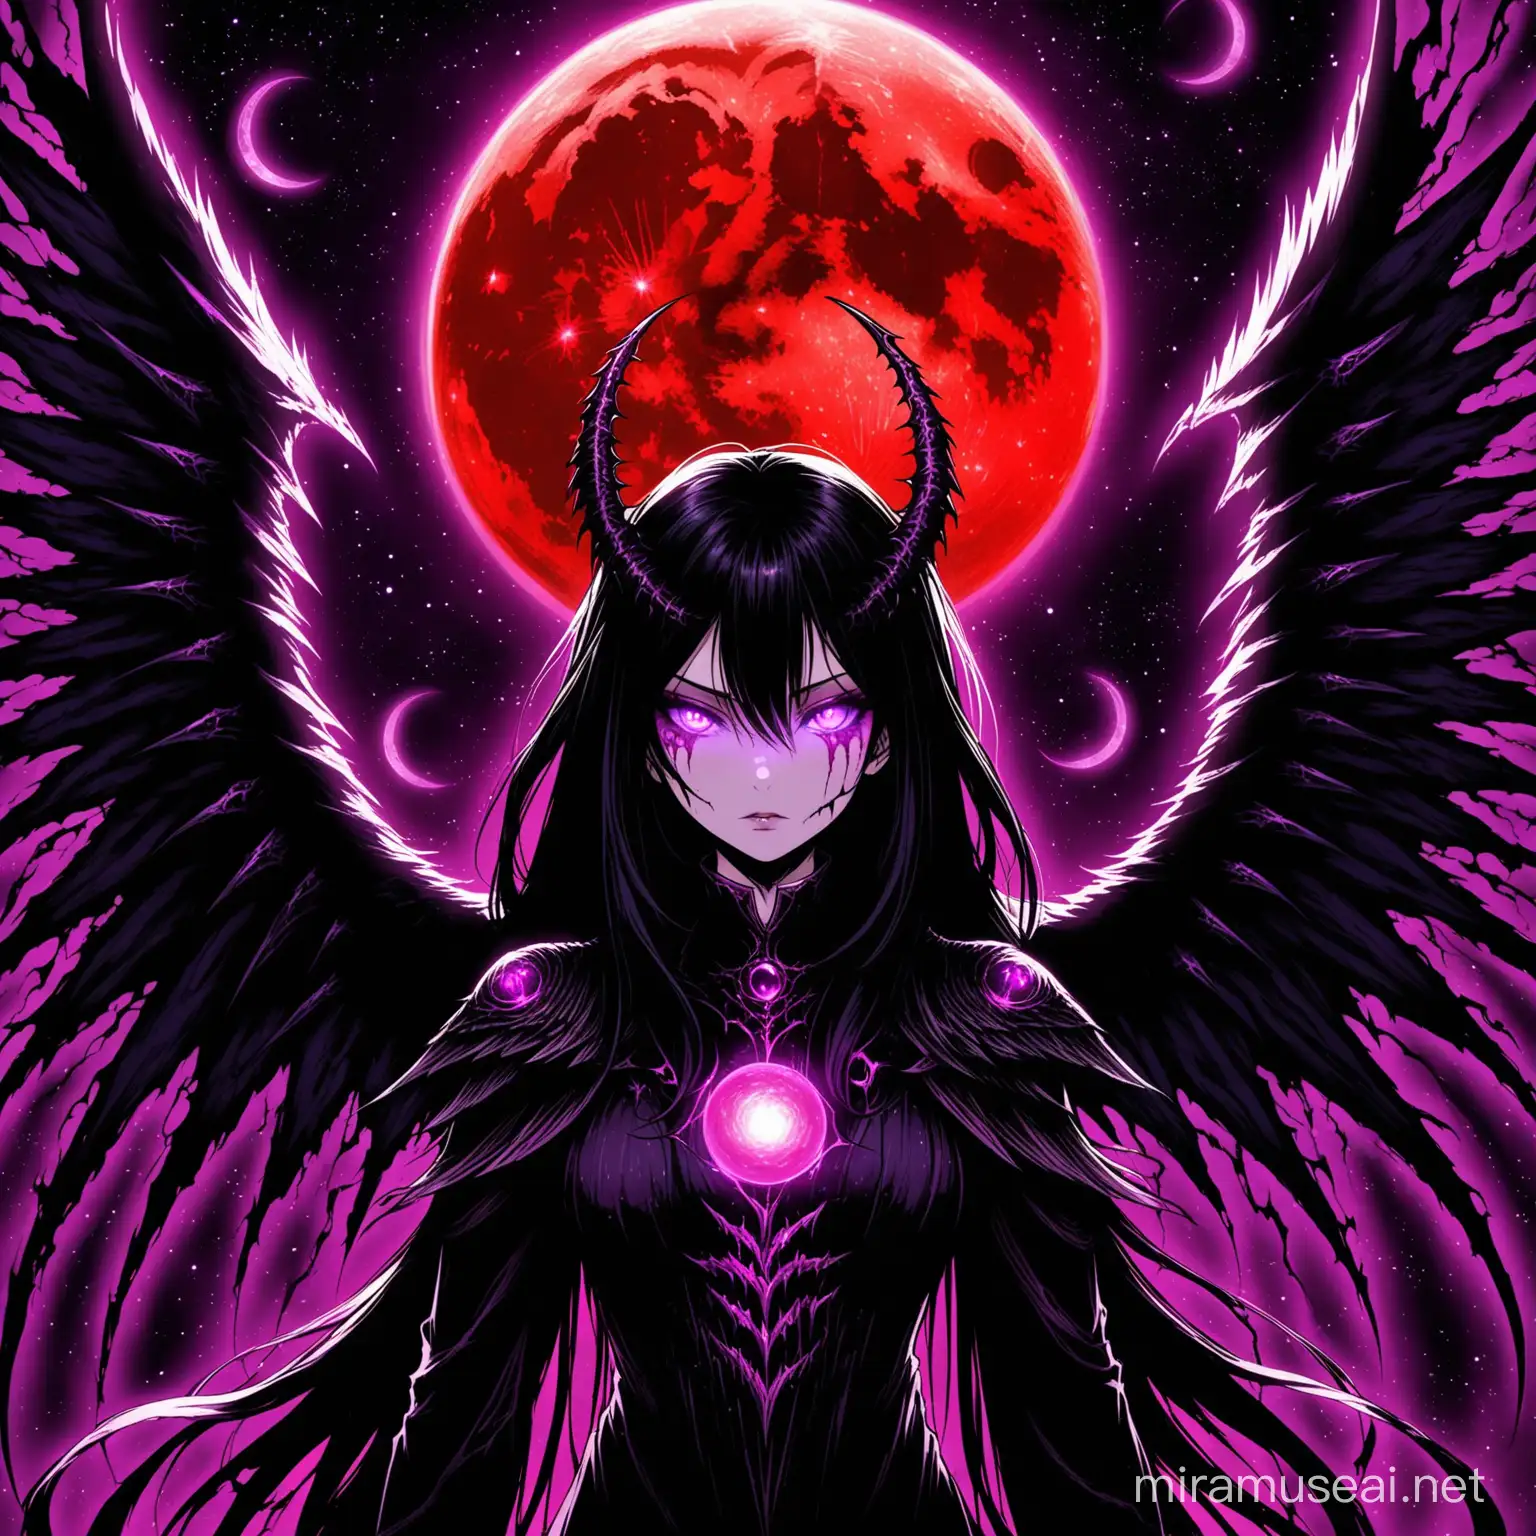 Eldritch Angel Woman in Space with Red Moon Dark Fantasy Anime Art